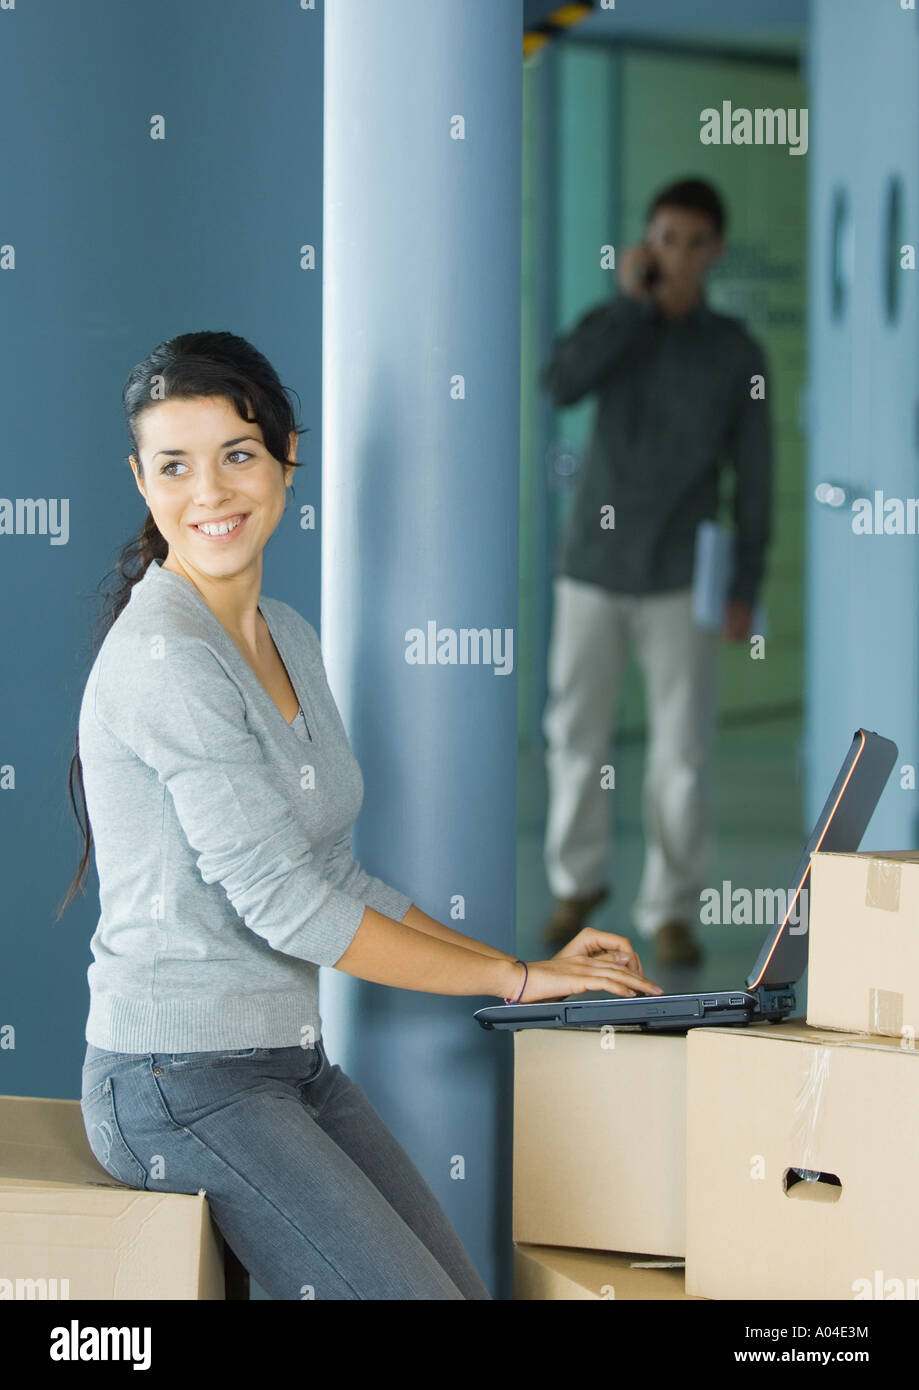 Young woman using laptop on cardboard box Stock Photo